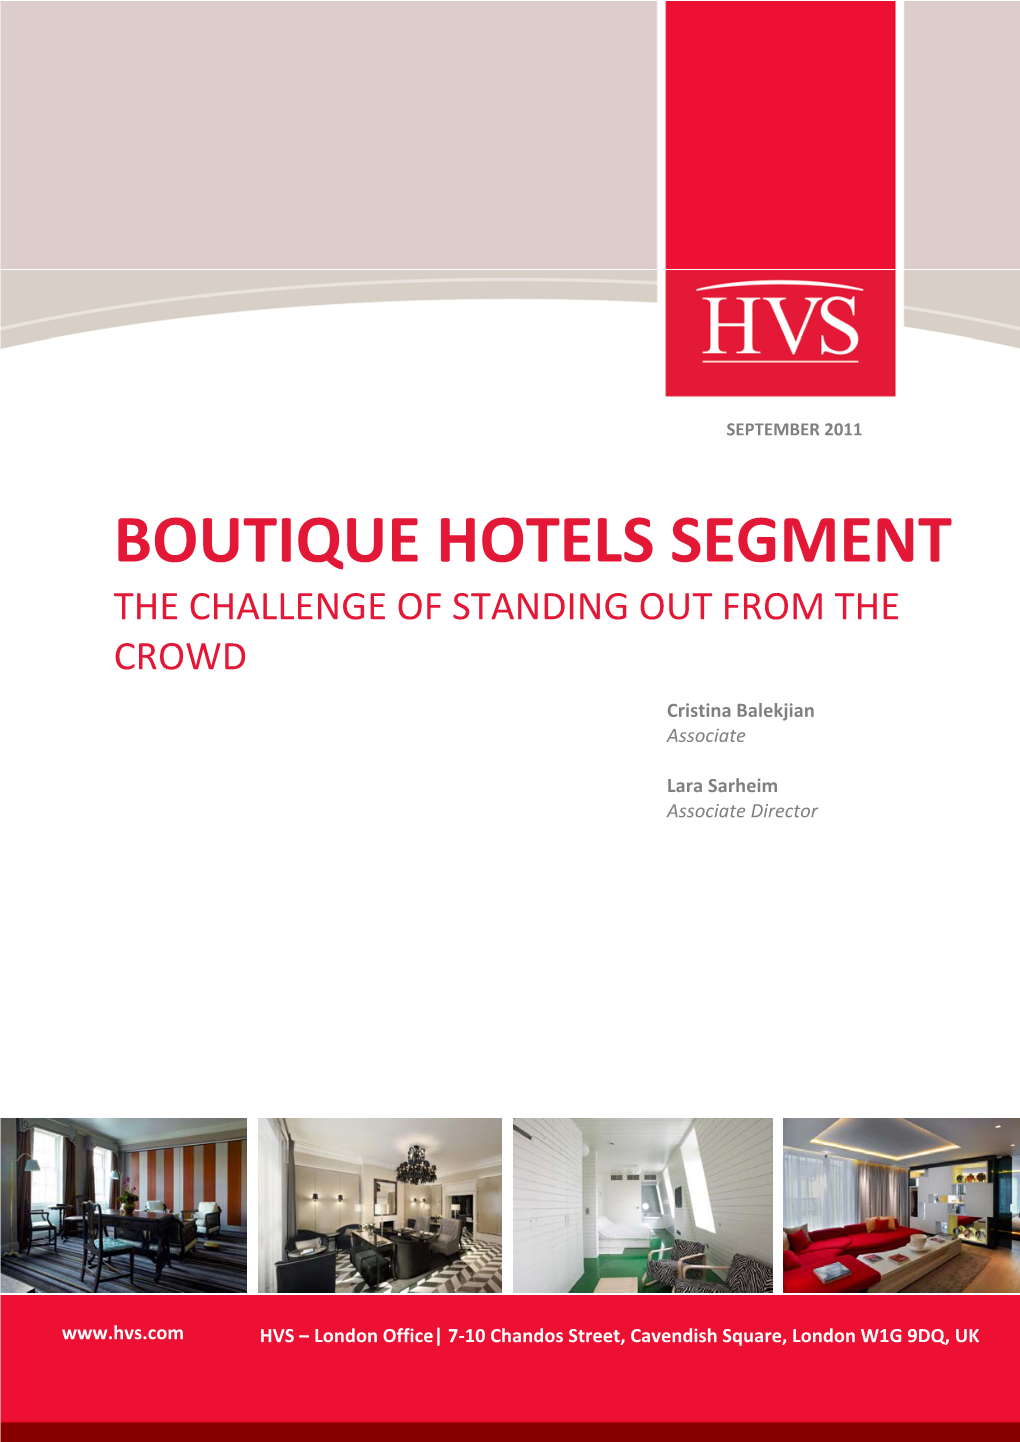 Boutique Hotels Segment the Challenge of Standing out from the Crowd